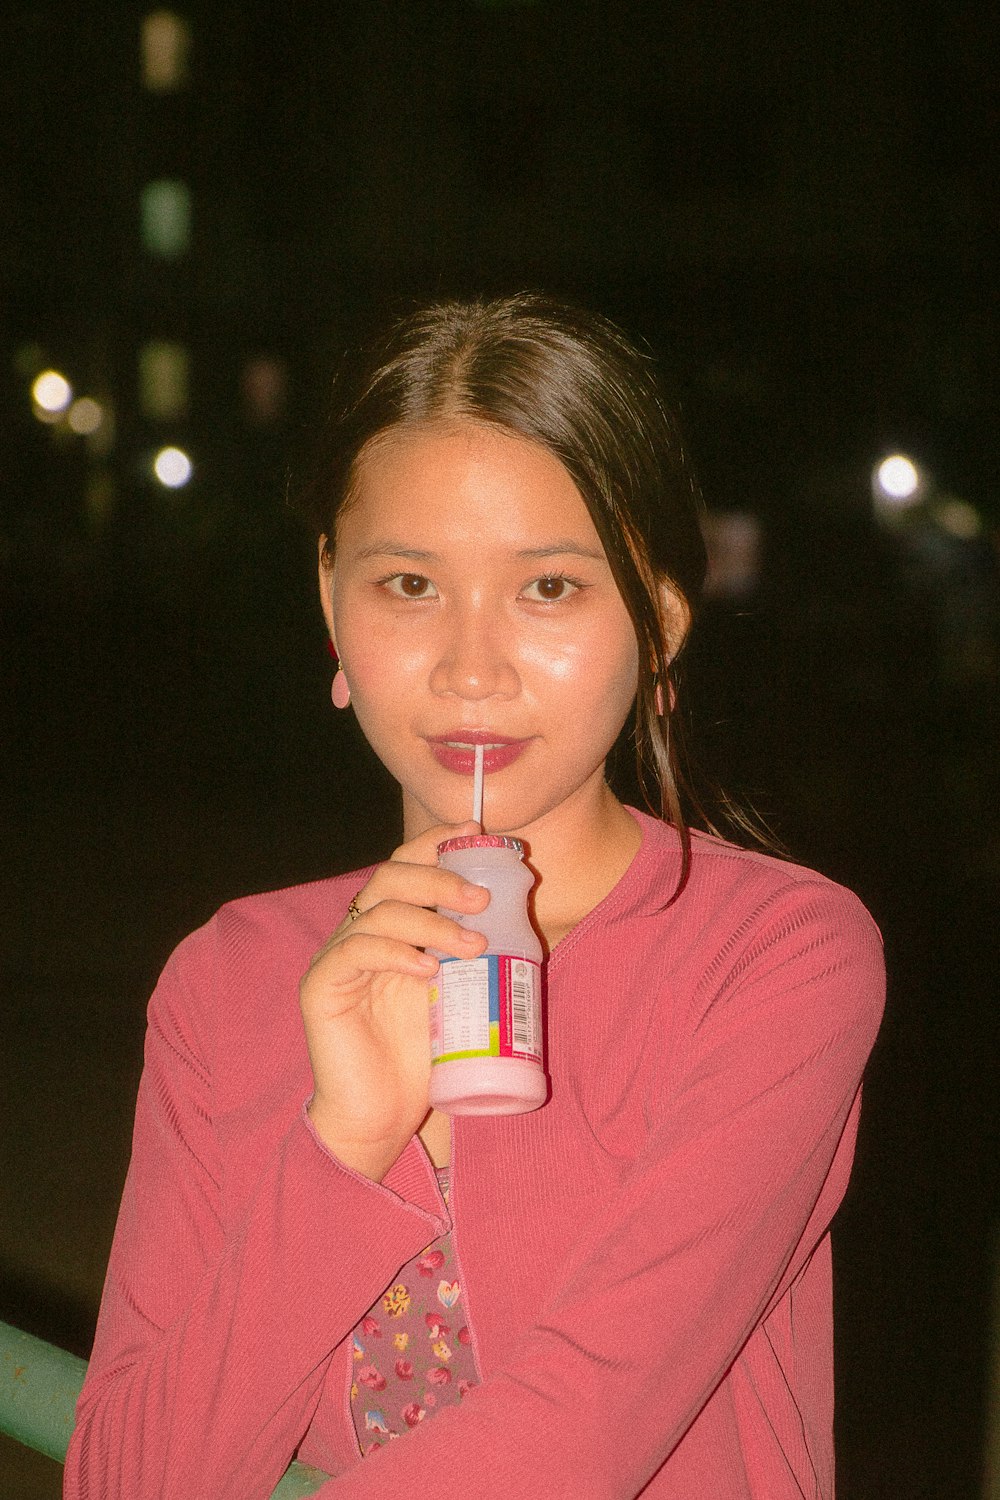 a girl in a pink shirt is holding a drink